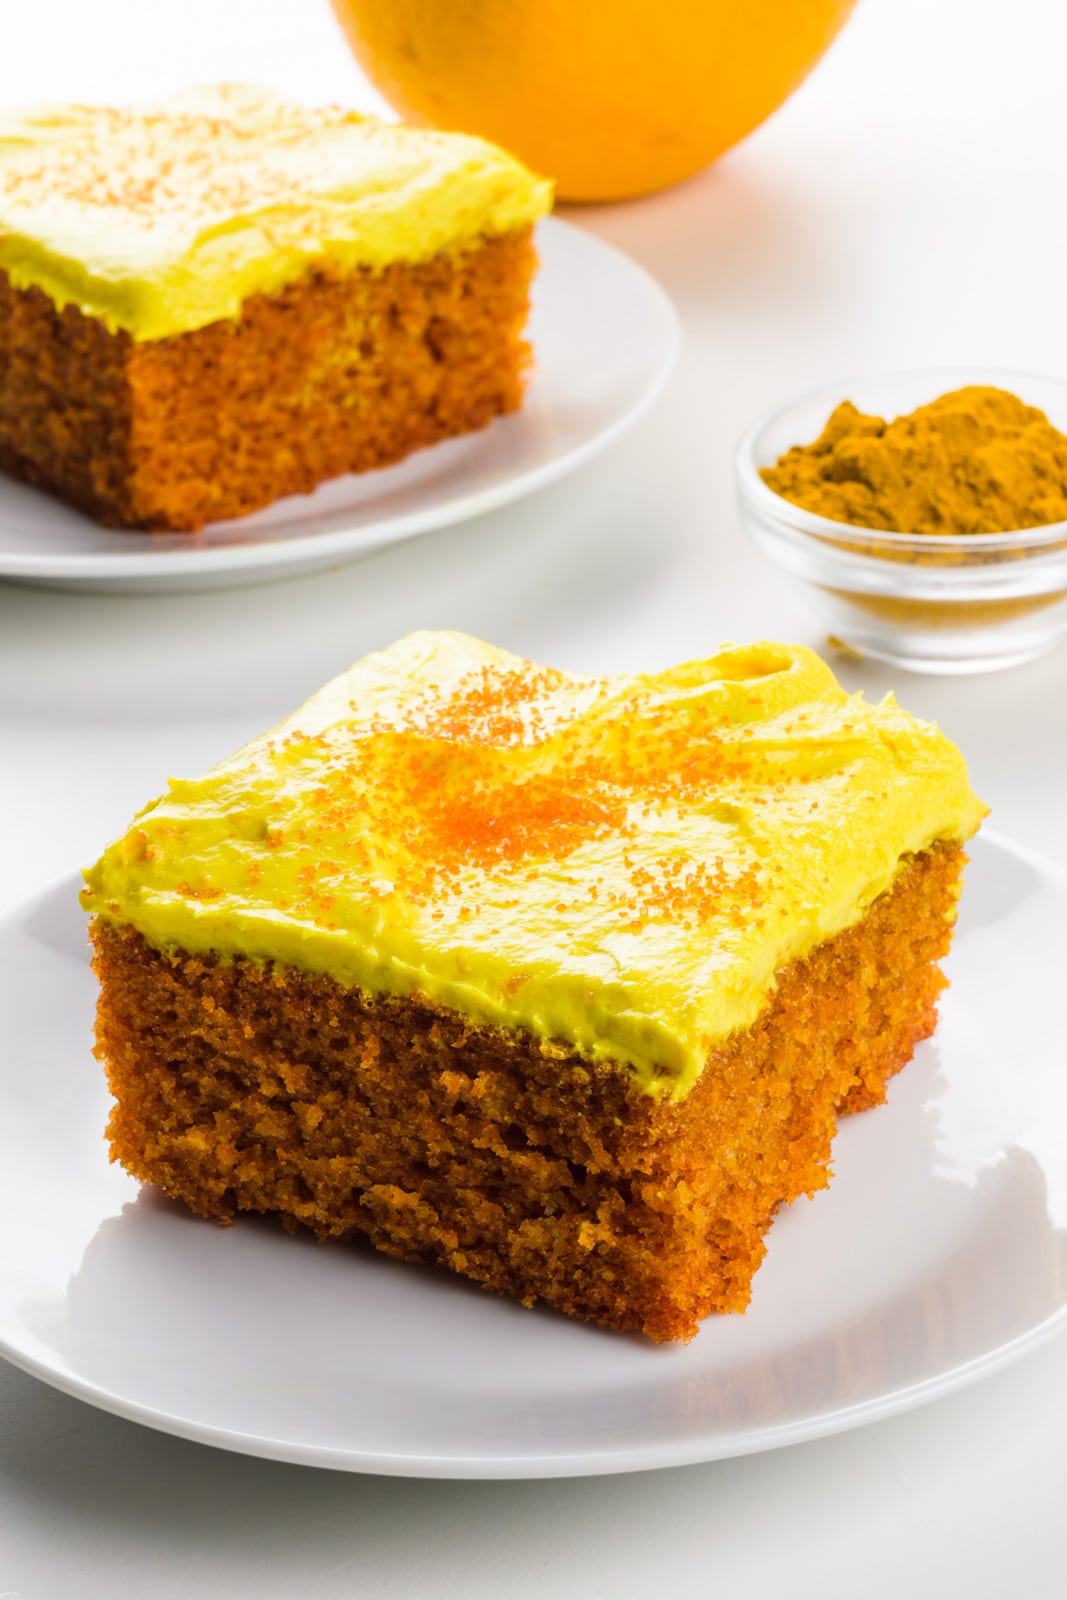 A slice of turmeric cake on a plate with another slice behind it. There's an orange and a bowl of turmeric beside it.